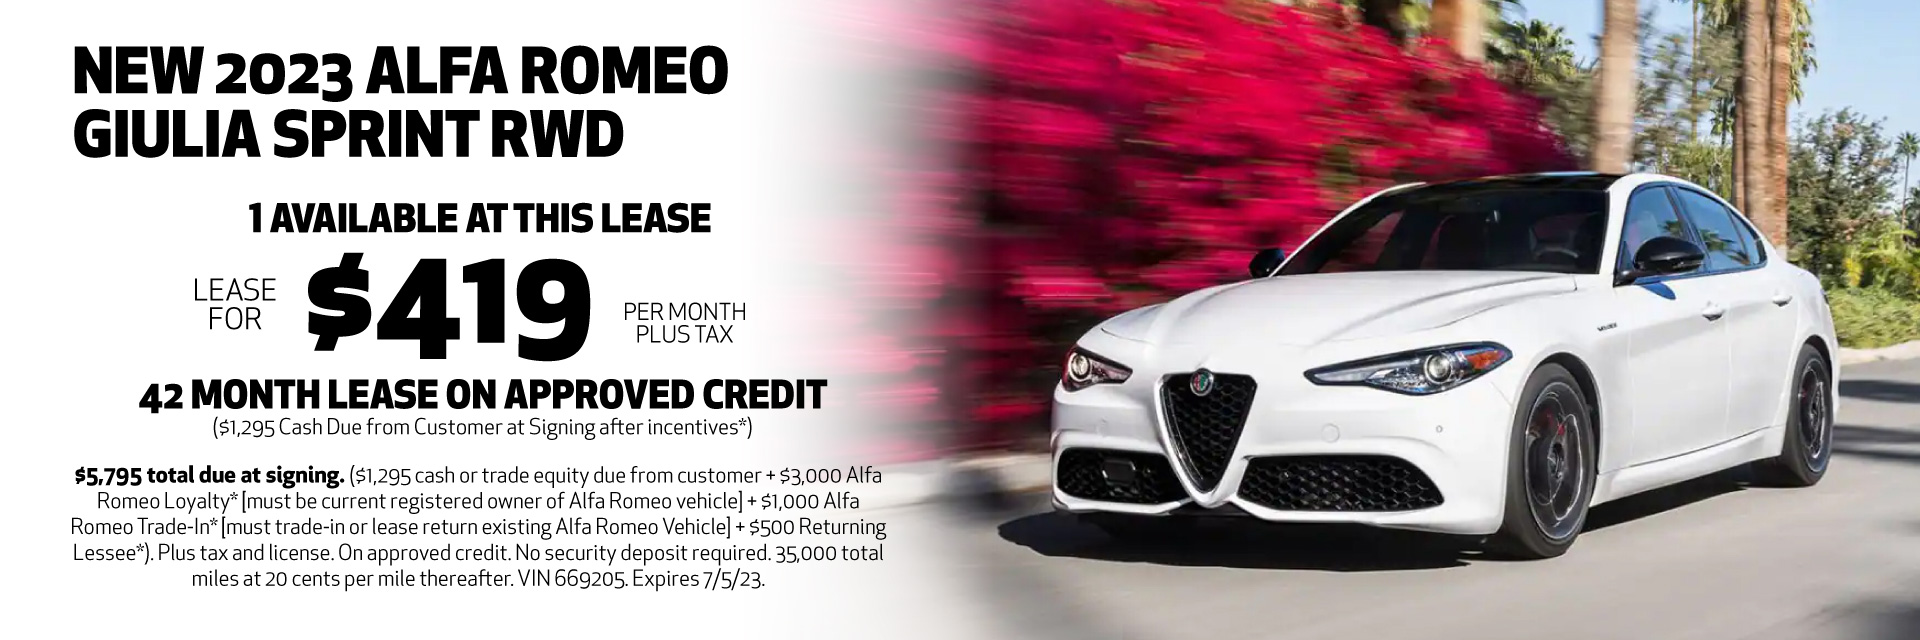 Lease a new 2023 Alfa Romeo Giulia Sprint RWD for $419/month plus tax for 42 months on approved credit. Offer expires 7/5/2023.